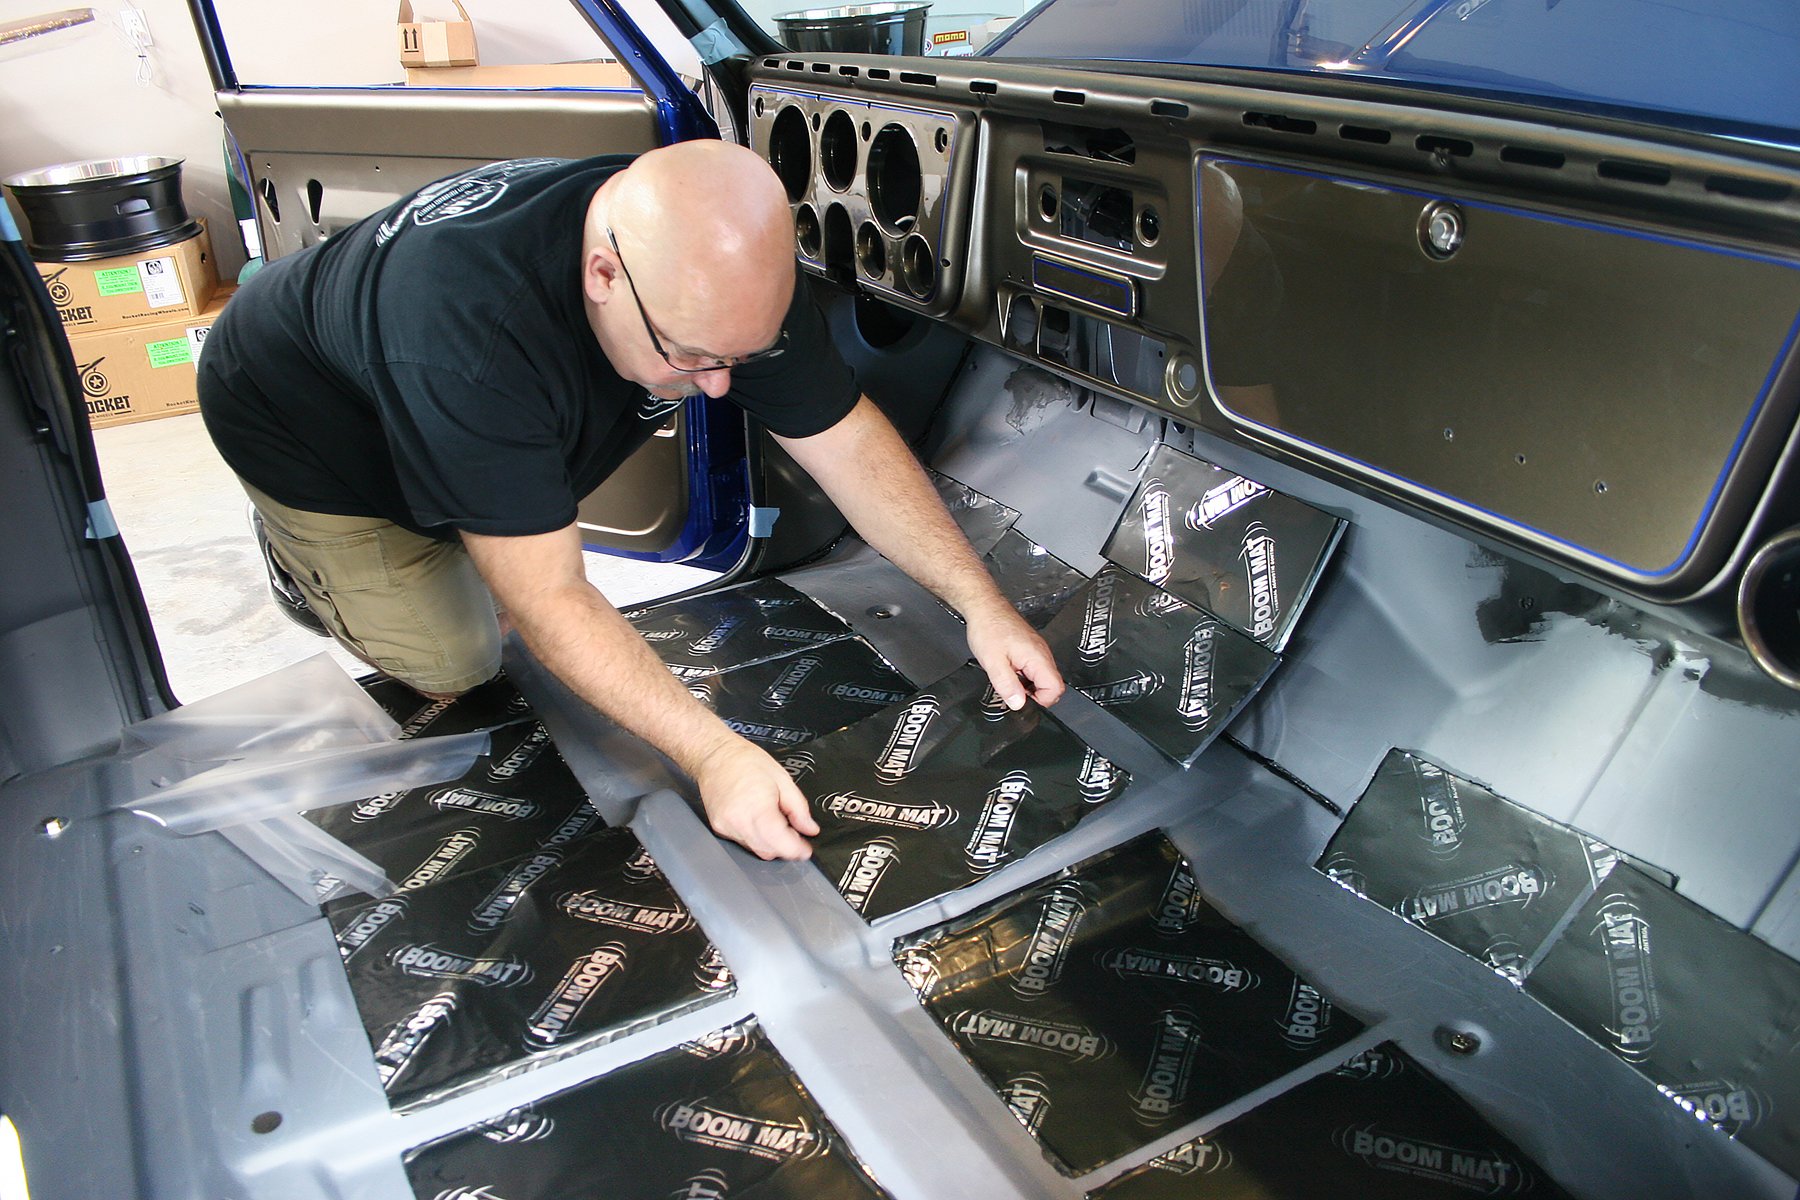 Improving The Interior Of Your C10 Or OBS Truck With Help From DEI